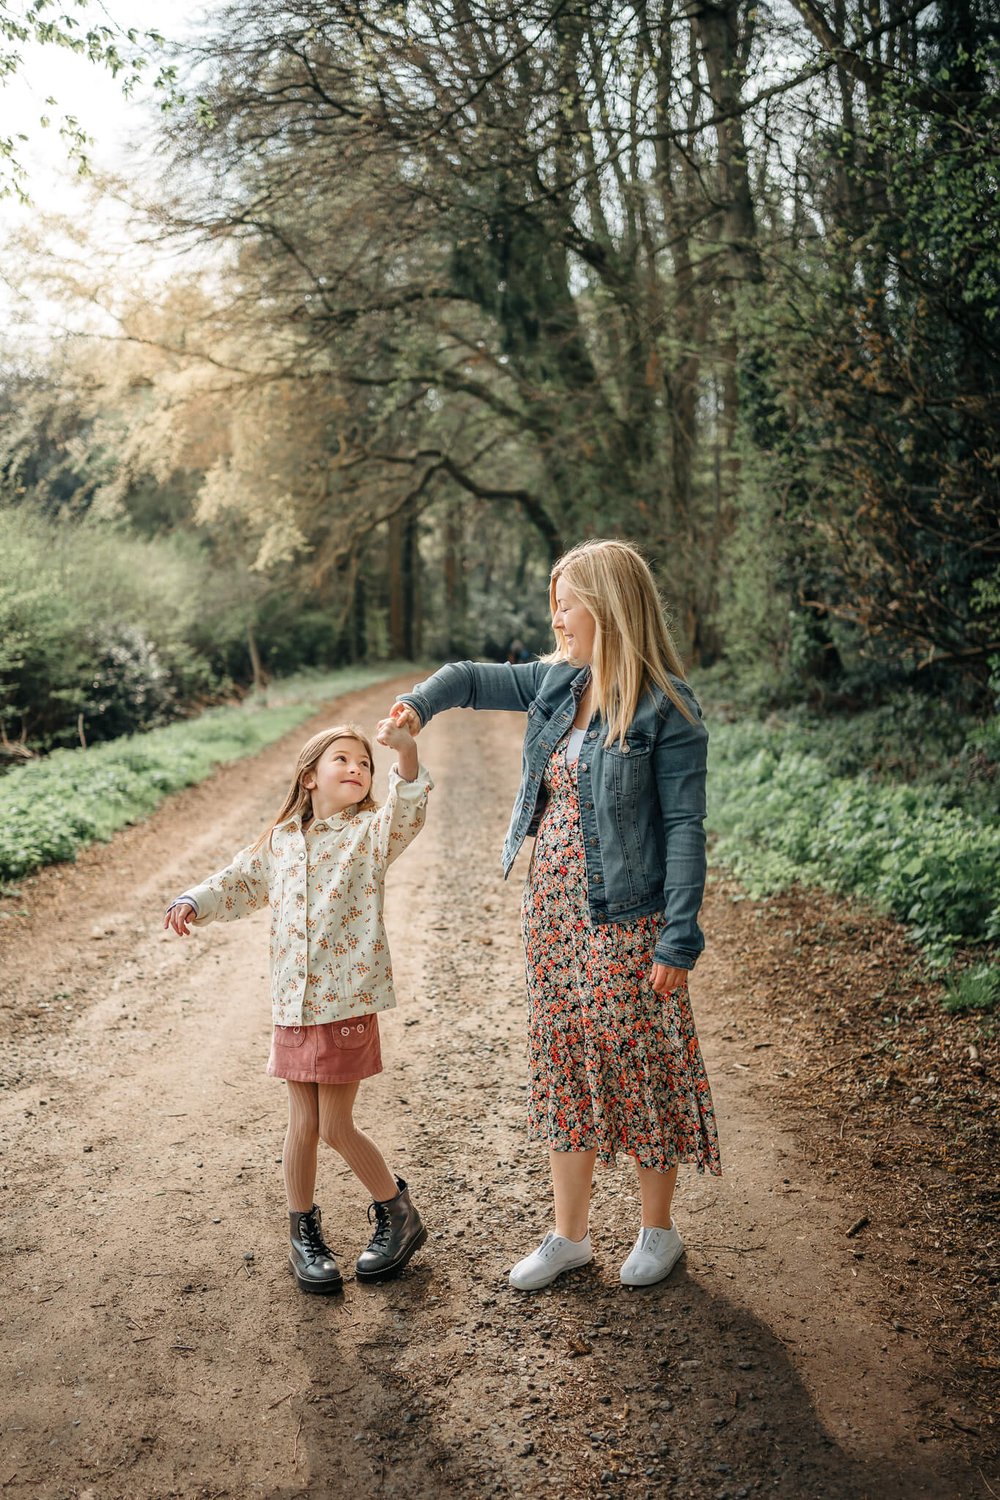 Mum twirling daughter in Cawston Woods Rugby